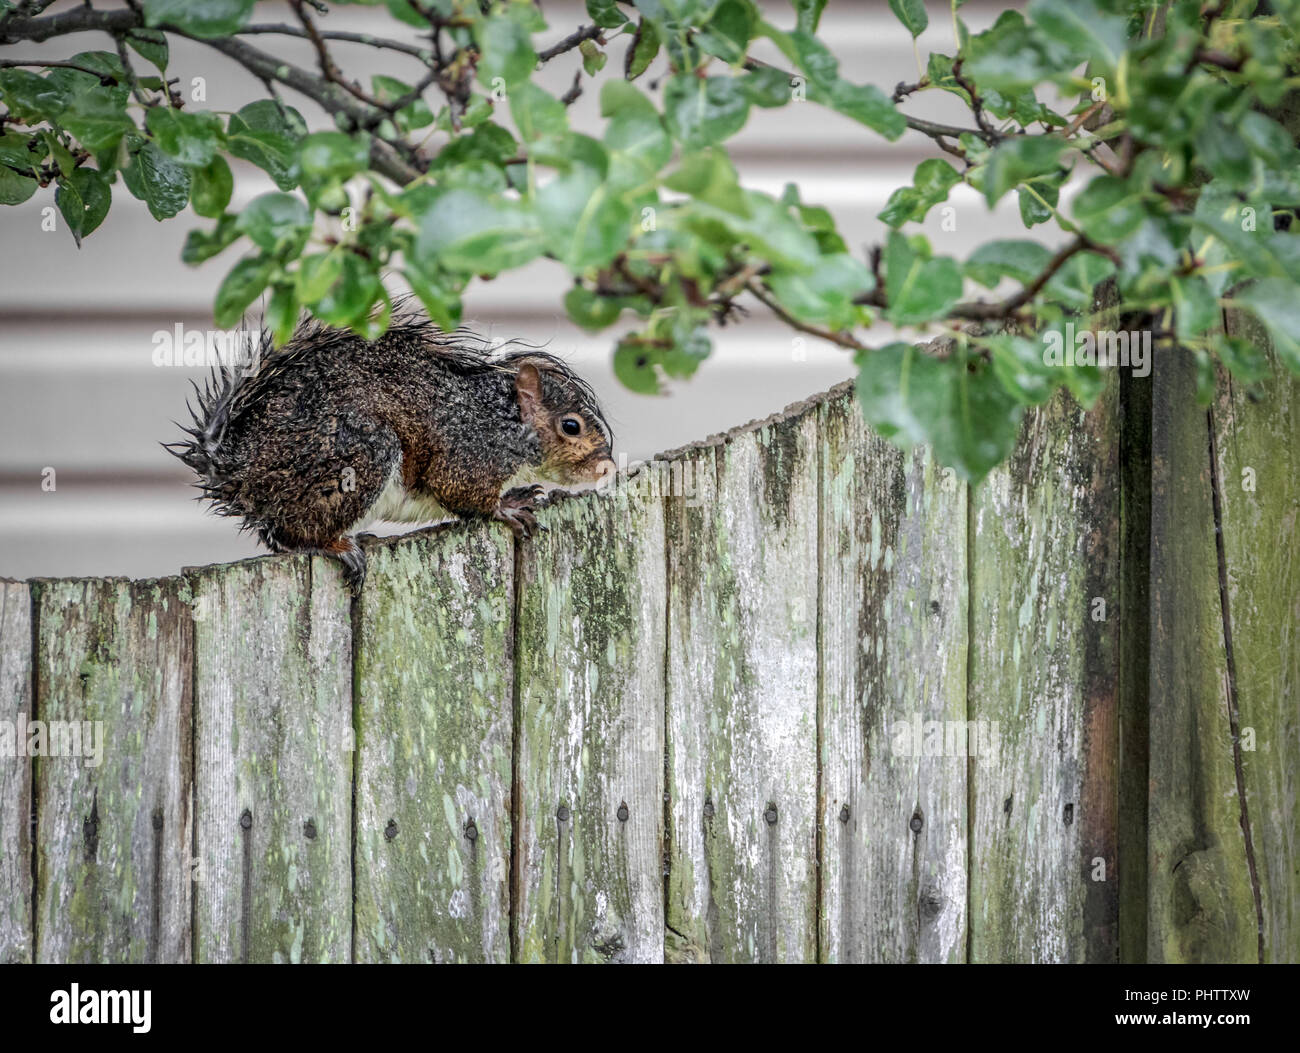 A Gray squirrel soaking wet from rain sitting unhappily on a fence trying to get dry. Stock Photo